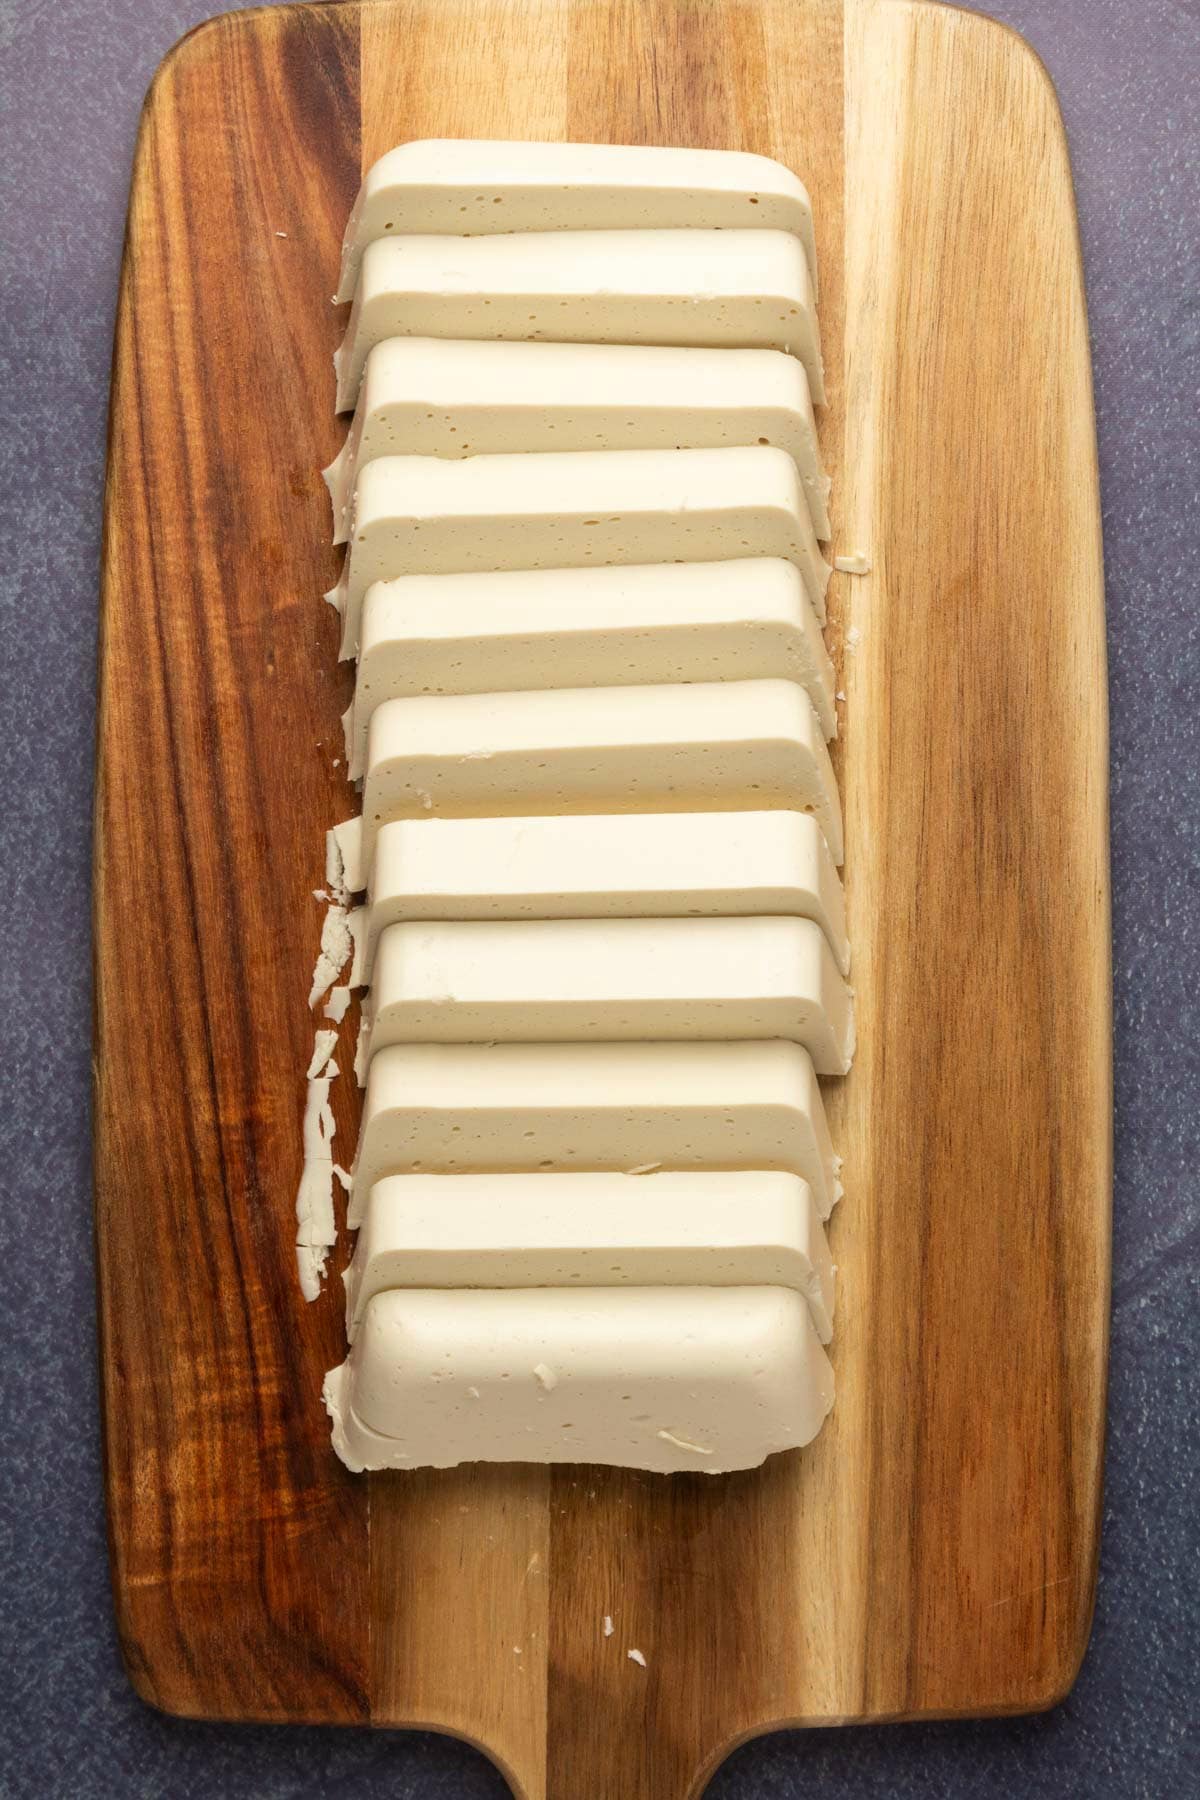 Vegan cheese cut into slices.